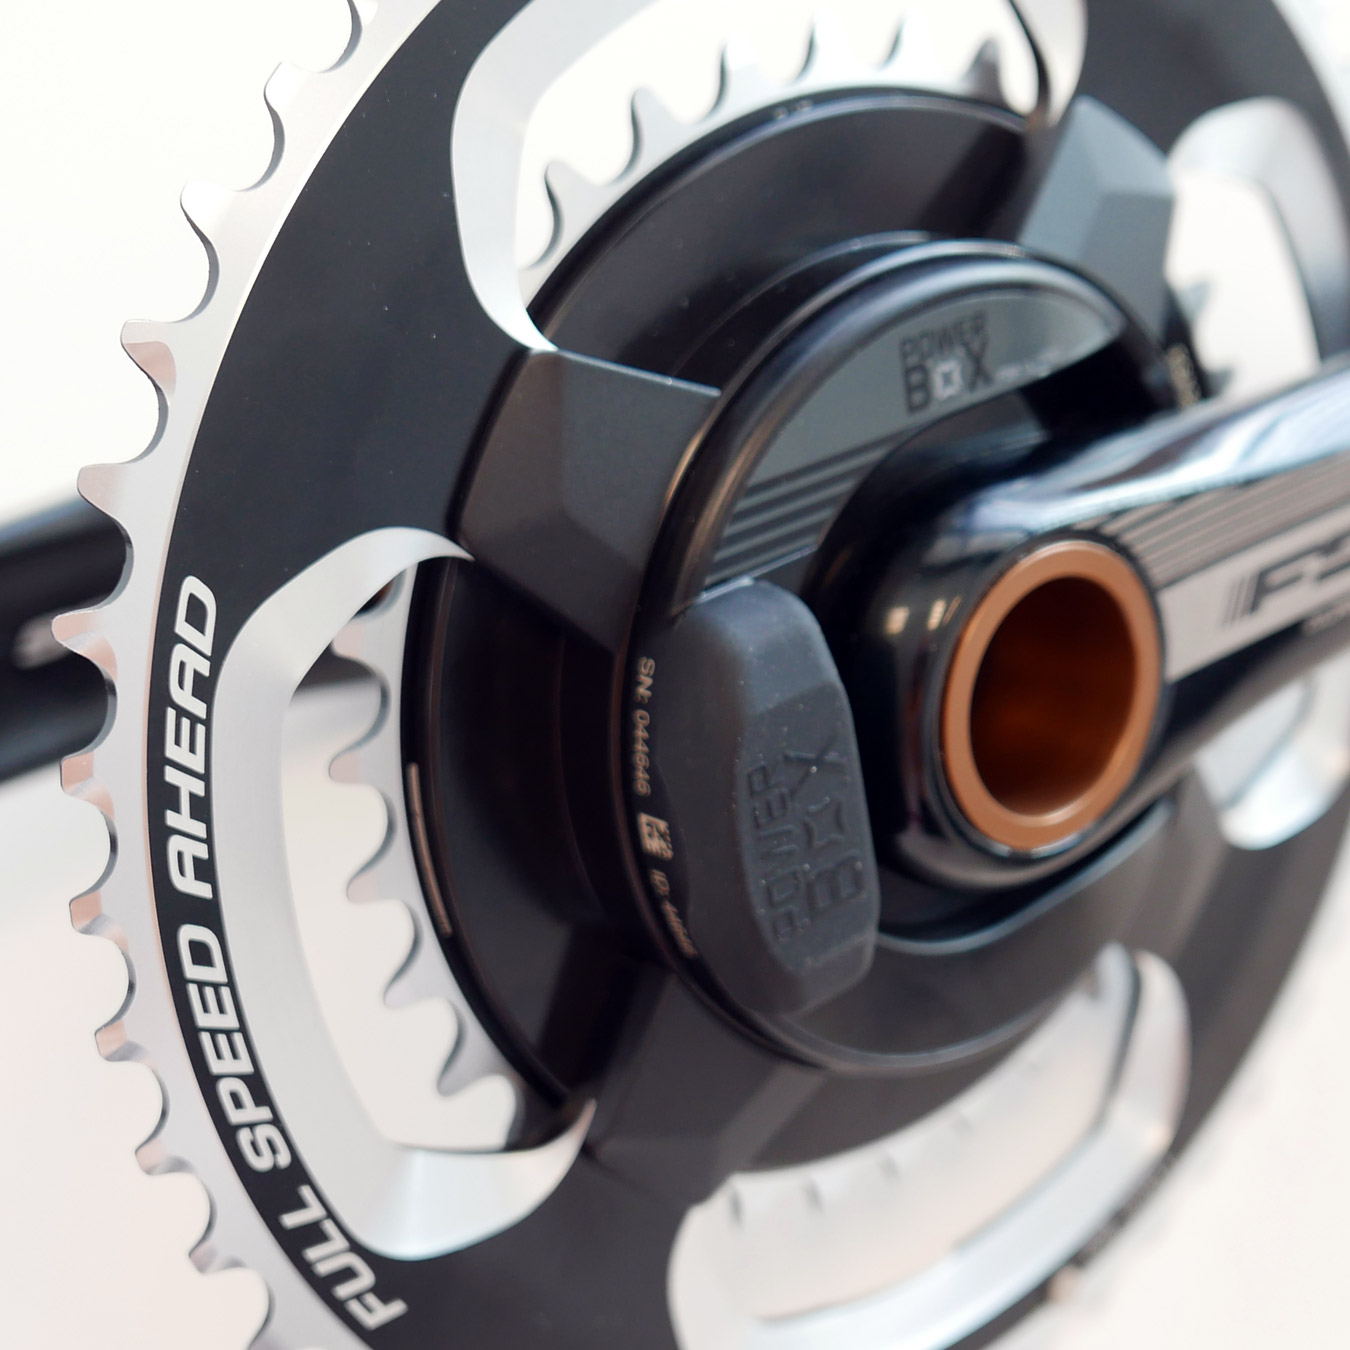 fsa_powerbox-alloy_forged-aluminum-single-side-power-meter-crankset-with-power2max_detail